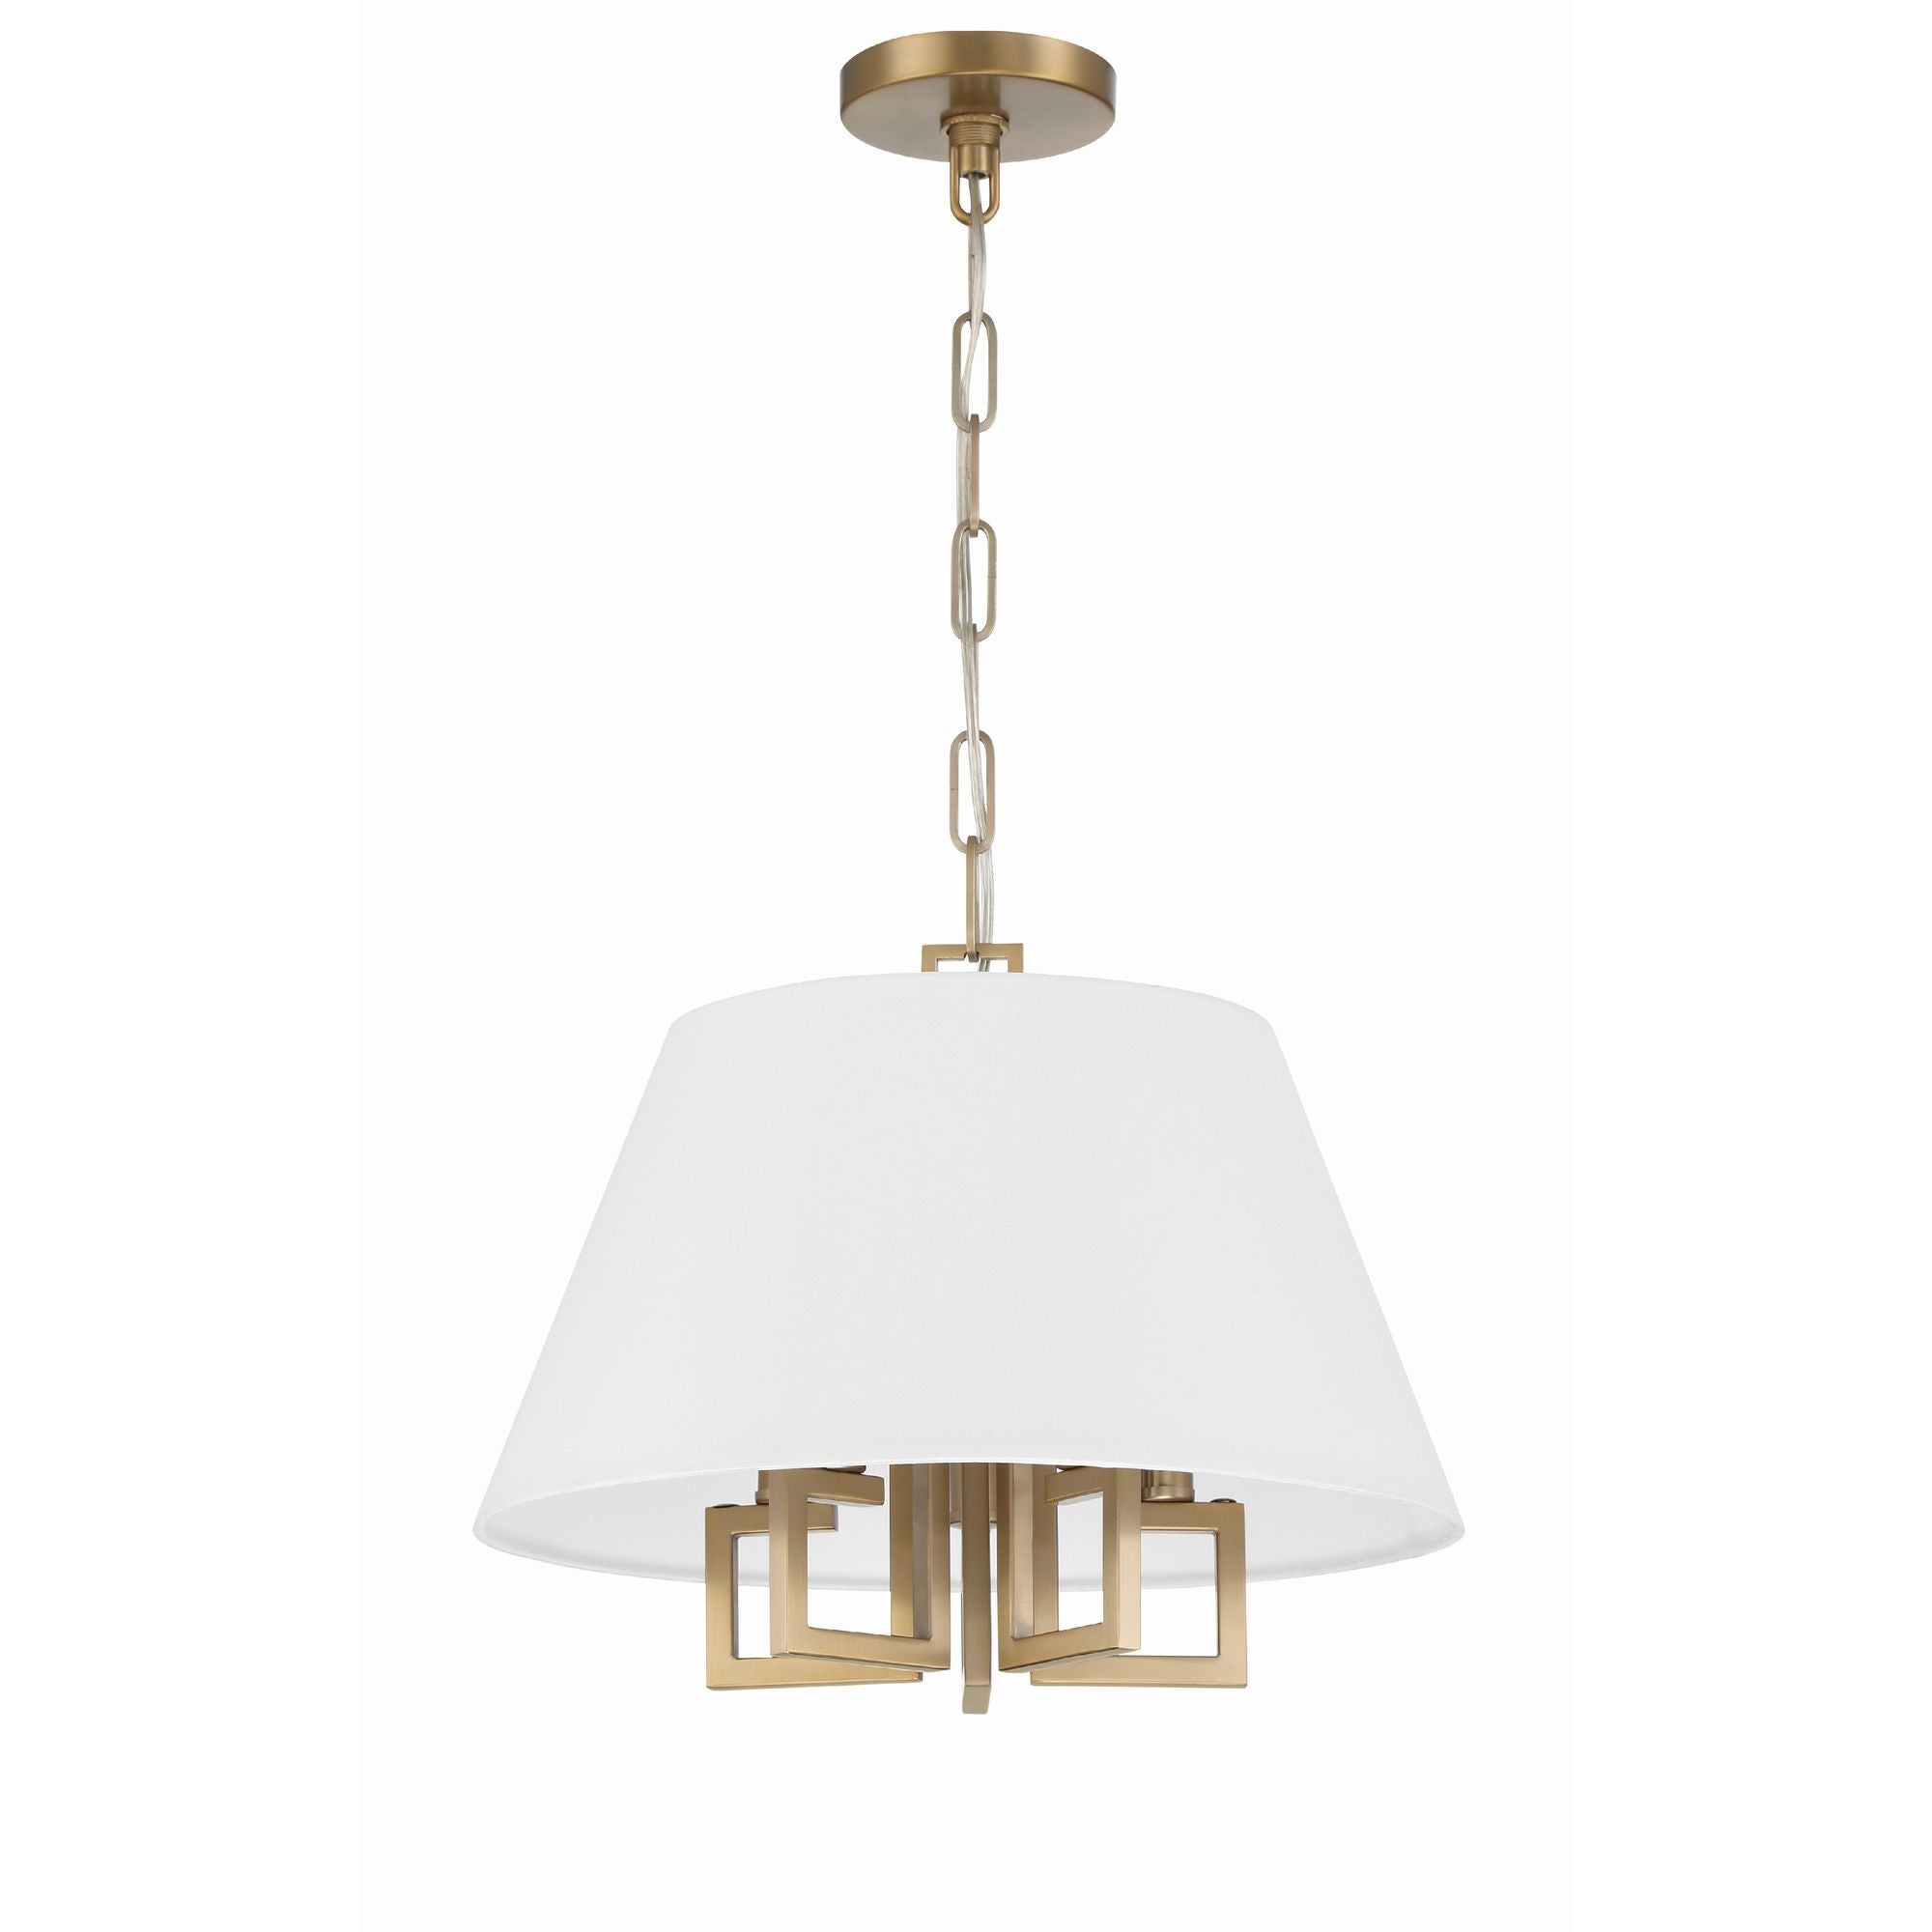 Libby Langdon for Crystorama Westwood 5 Light Vibrant Gold Mini Chandelier